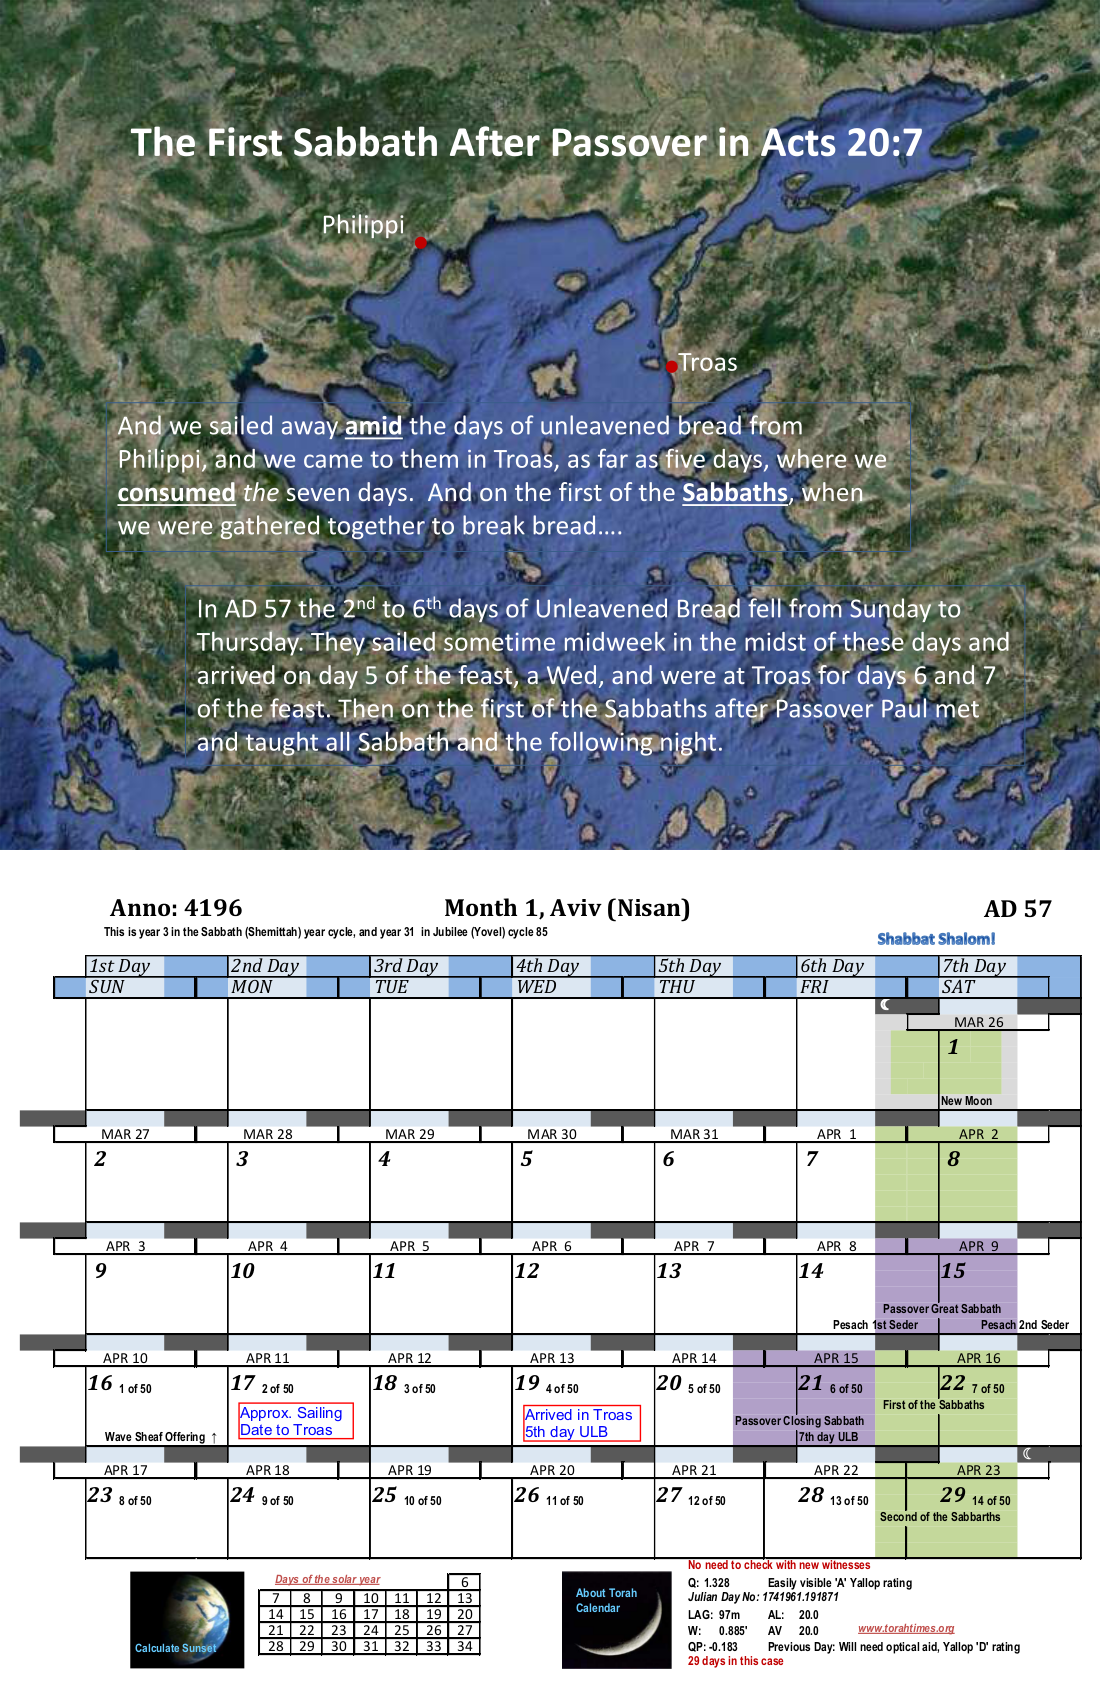 Chronology Charts Cover Image